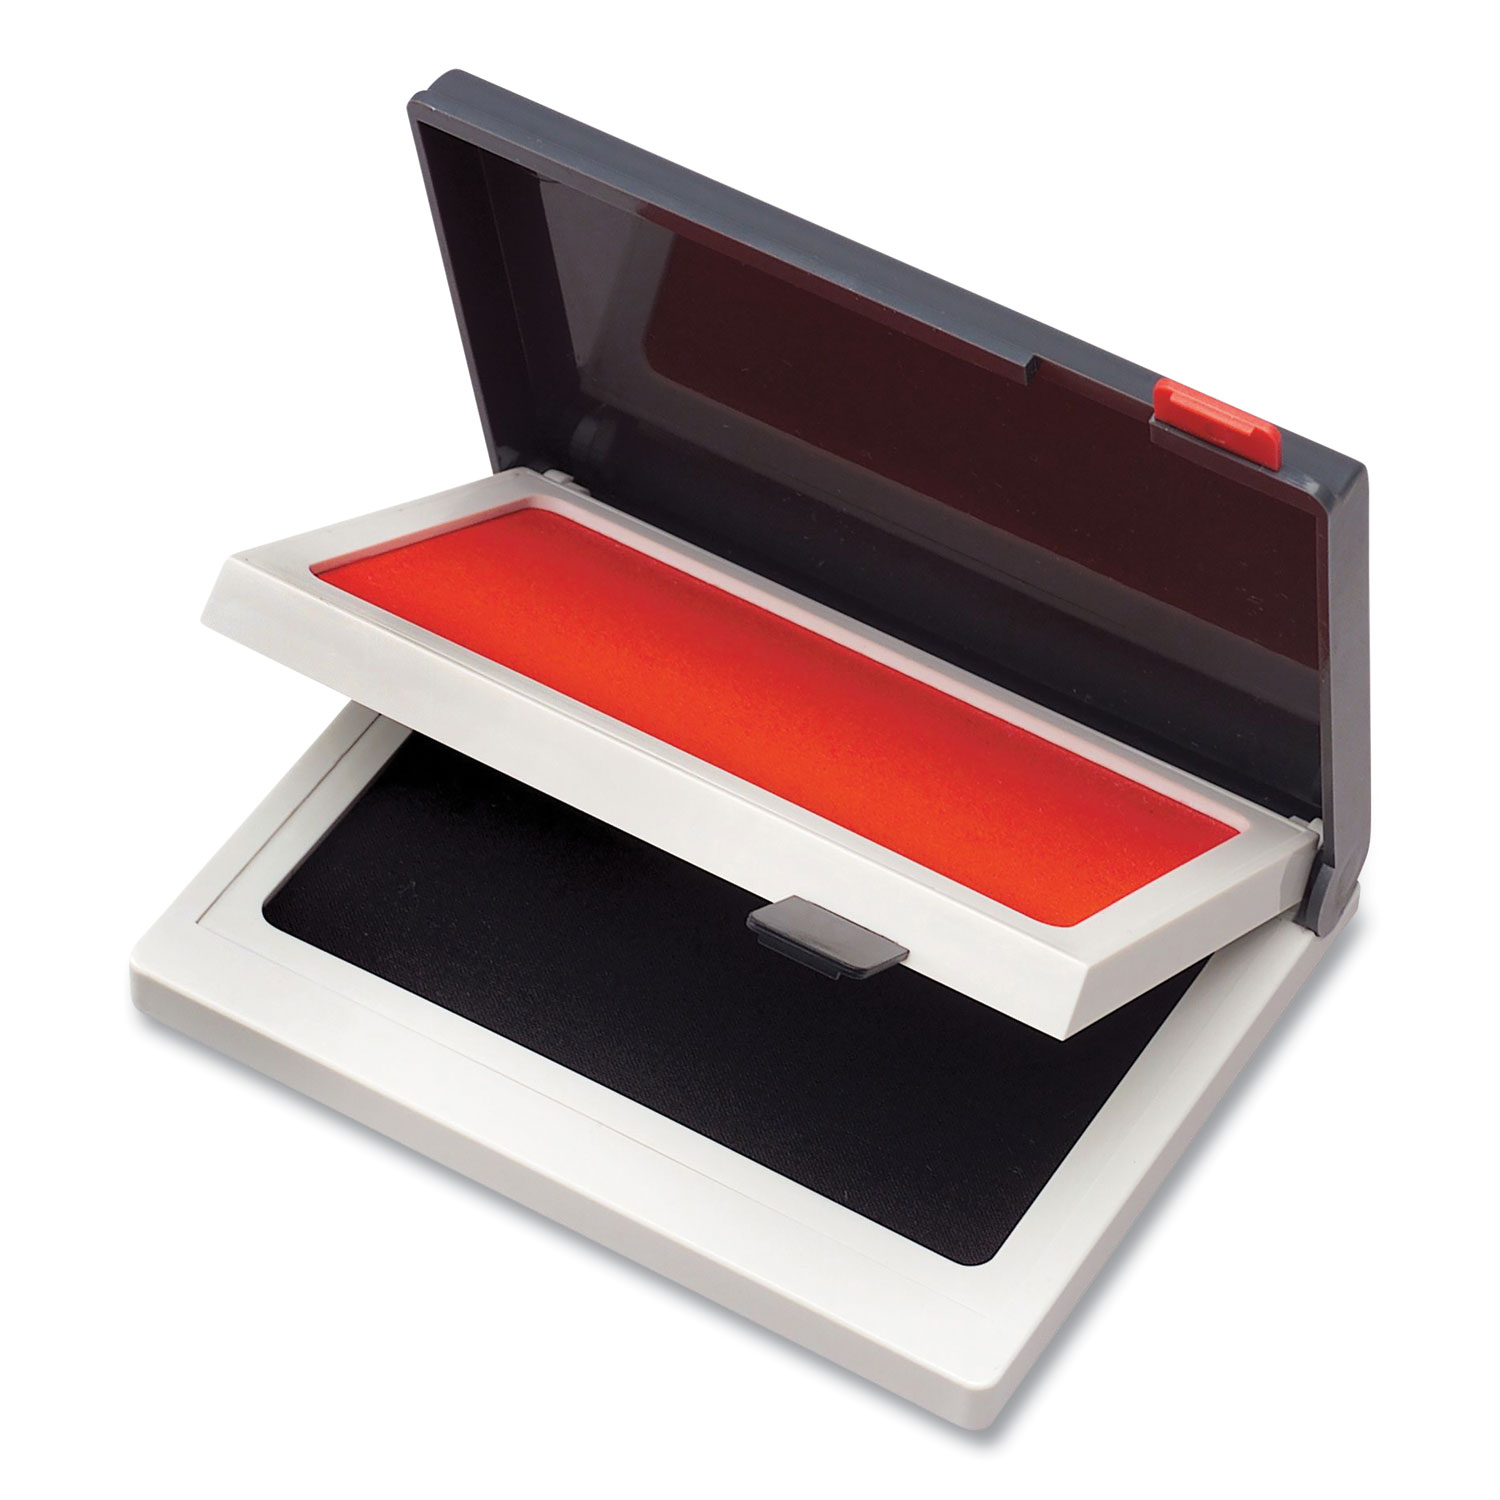 2000 PLUS Two-Color Felt Stamp Pad Case, 4 x 2, Black/Red - Zerbee